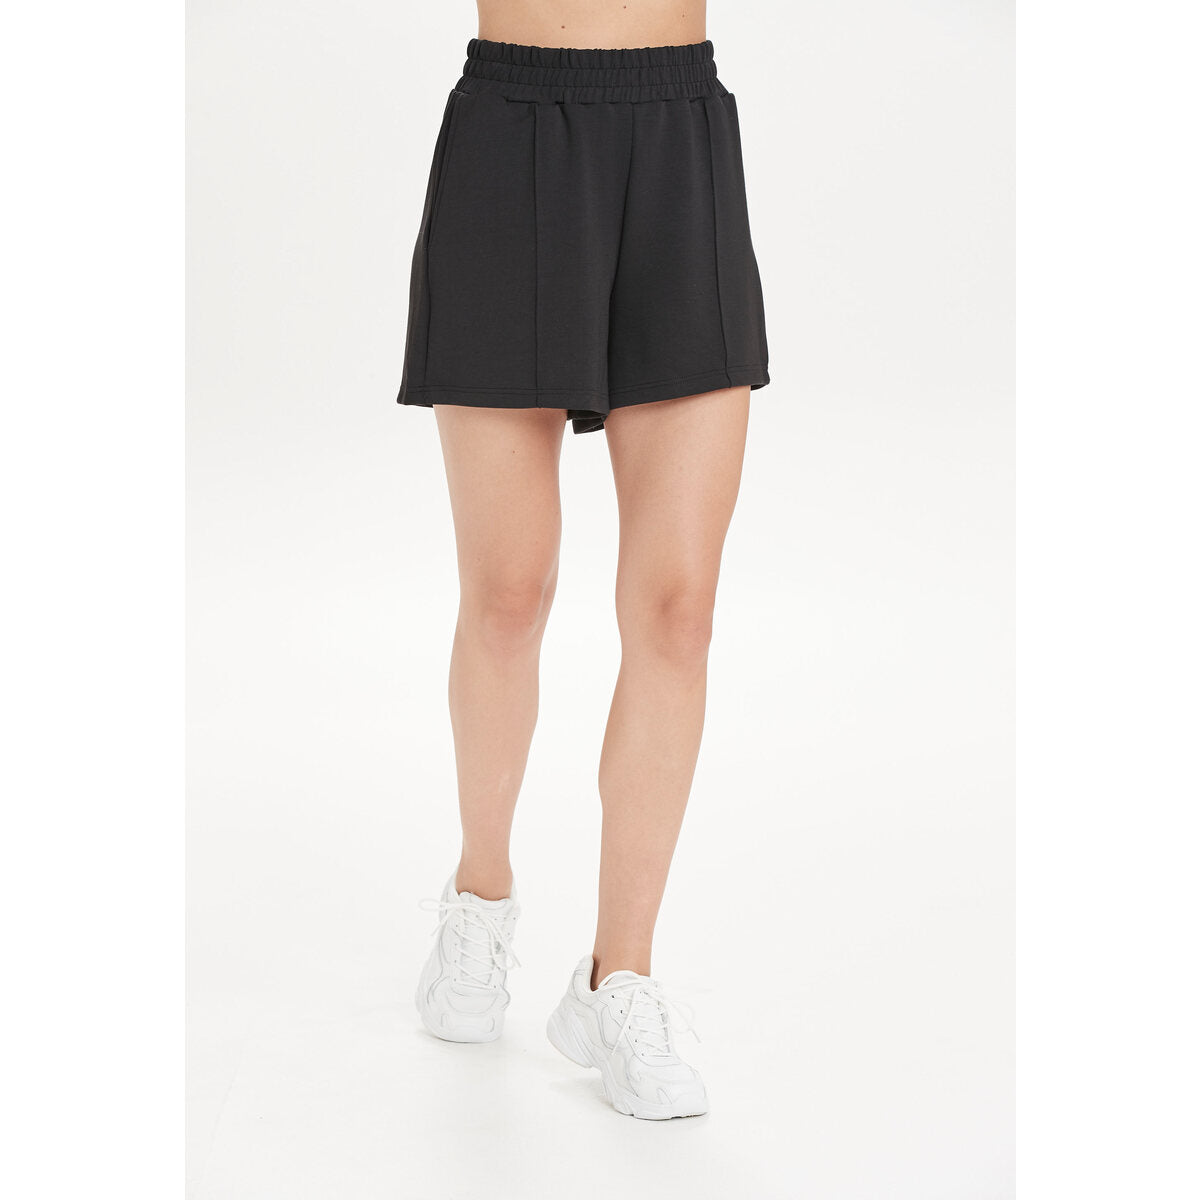 Athlecia Jacey Womenswear High Waisted Lounge Shorts - Black 2 Shaws Department Stores